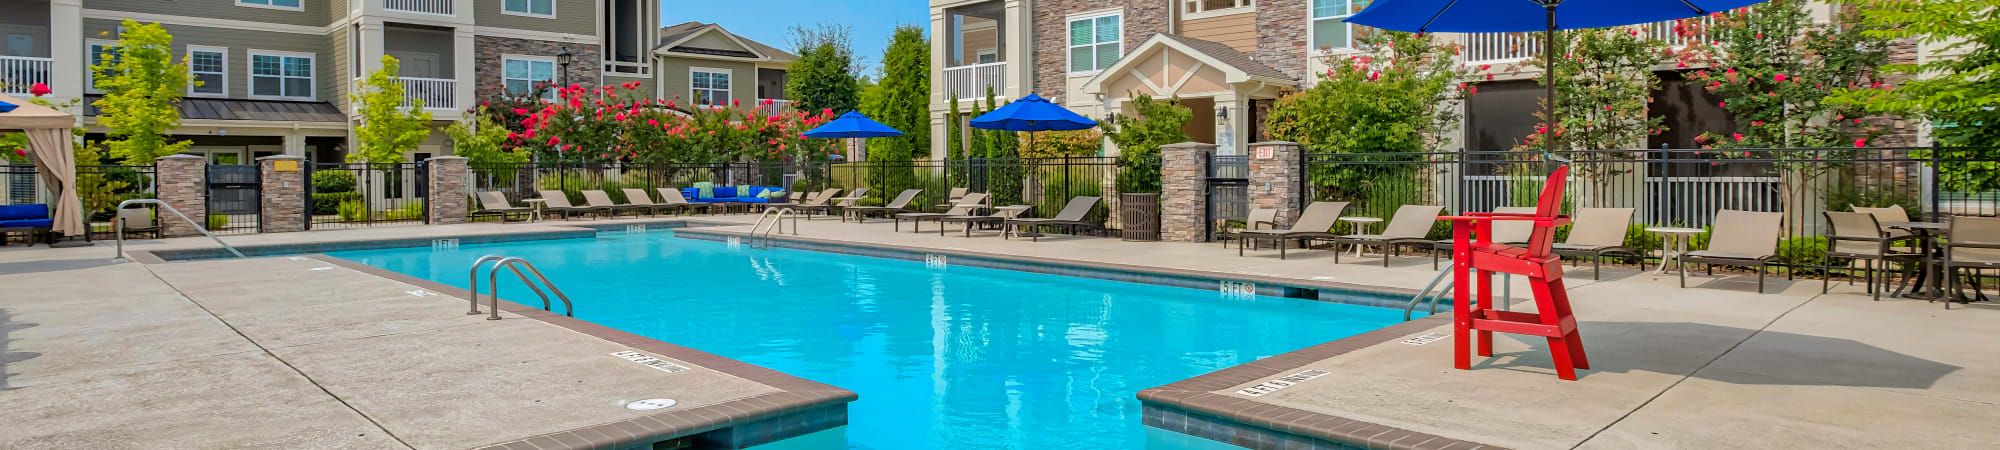 Schedule a tour of Oasis at Montclair Apartments in Dumfries, Virginia